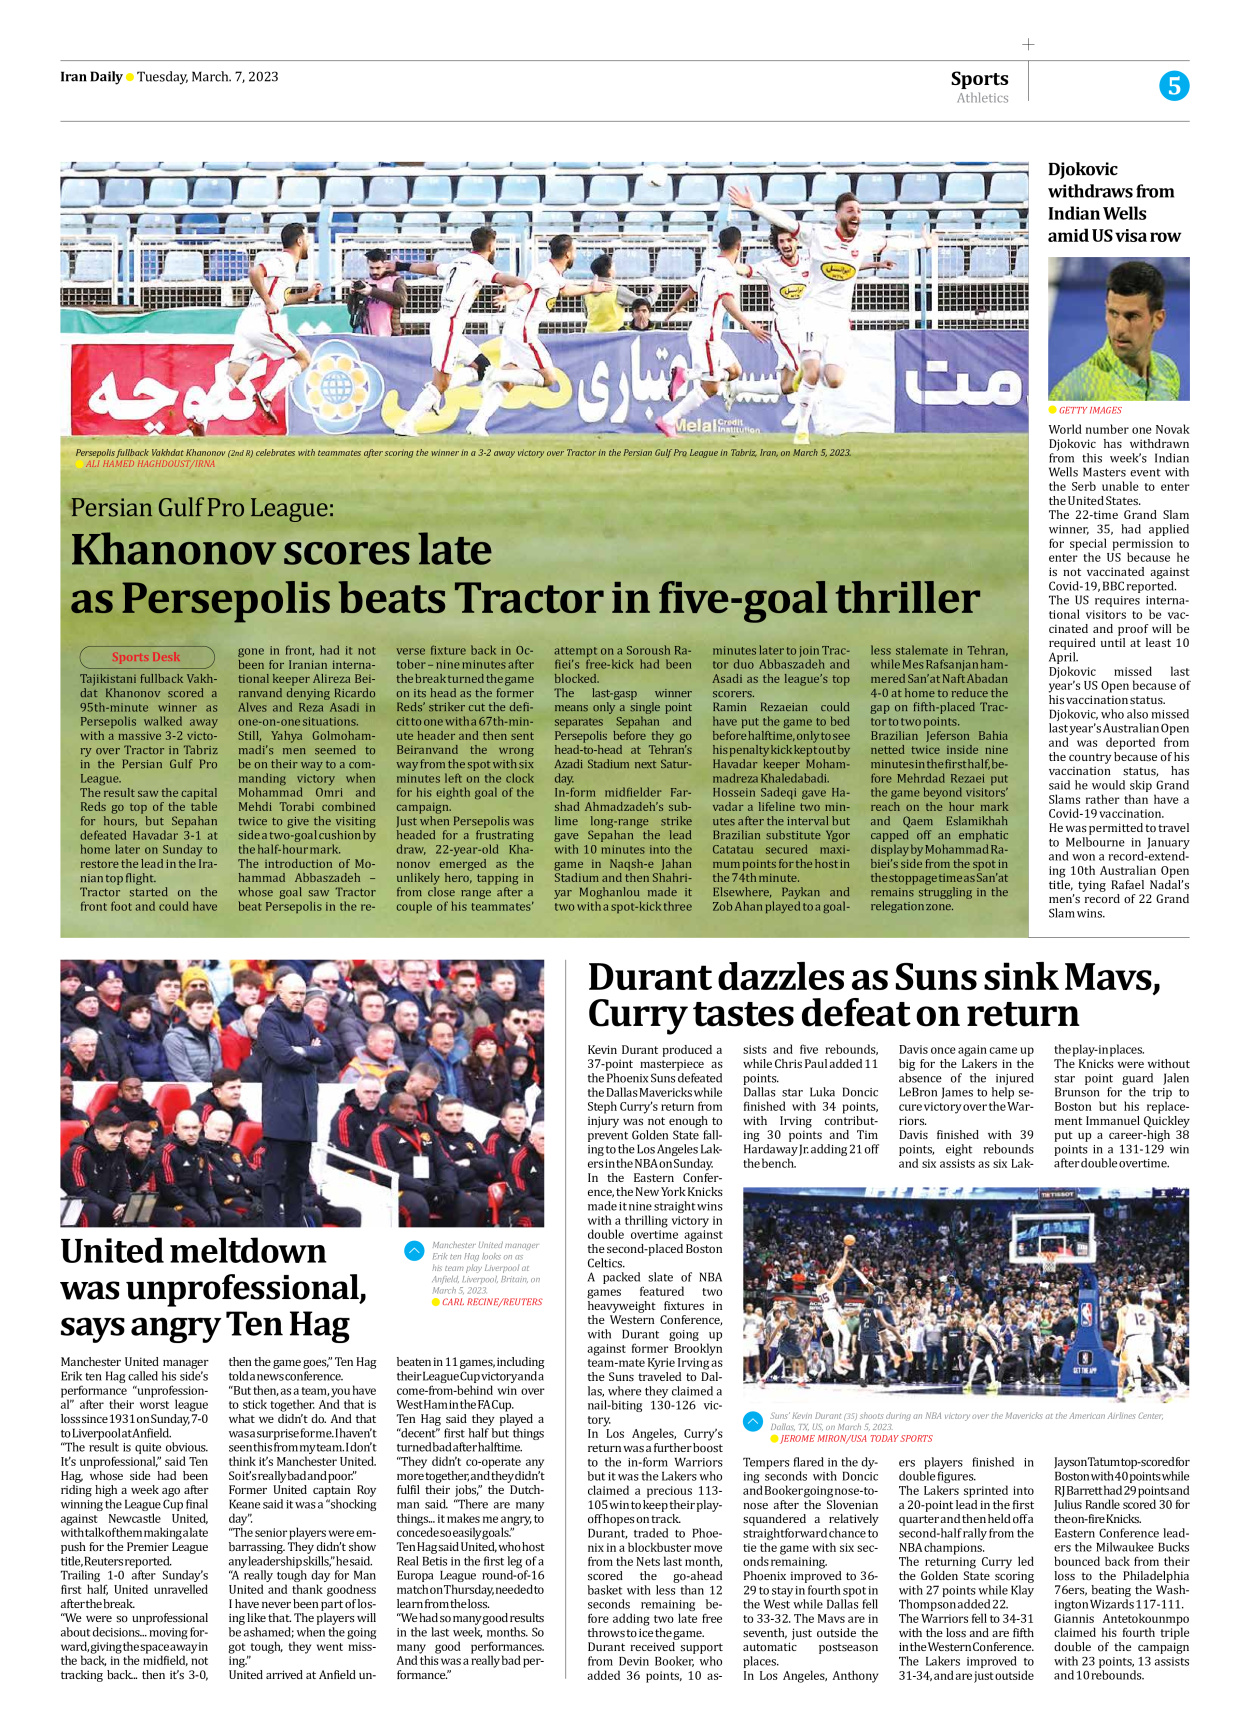 Iran Daily - Number Seven Thousand Two Hundred and Fifty Three - 07 March 2023 - Page 5